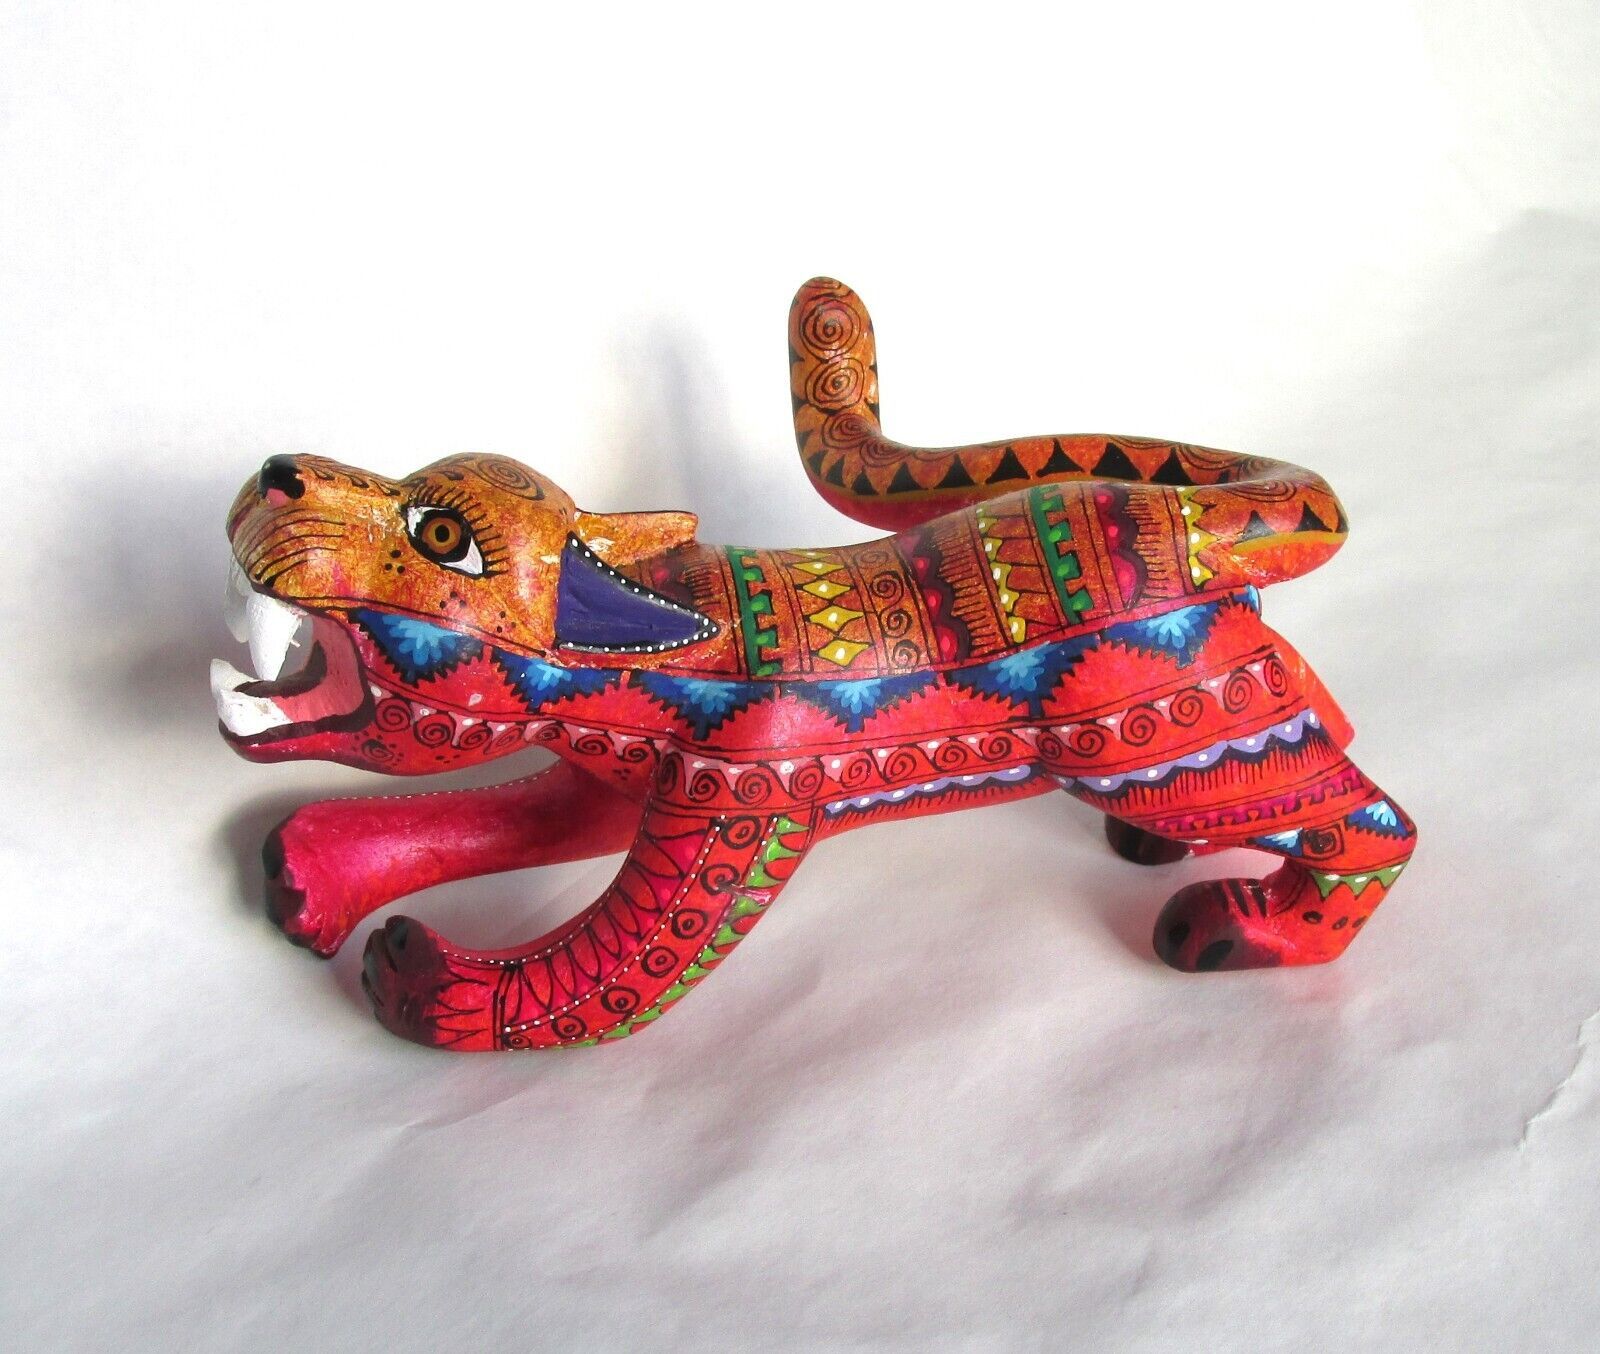 Primary image for Puma Jaguar Alebrije Handmade Copal Wood Carving from Oaxaca, Mexico